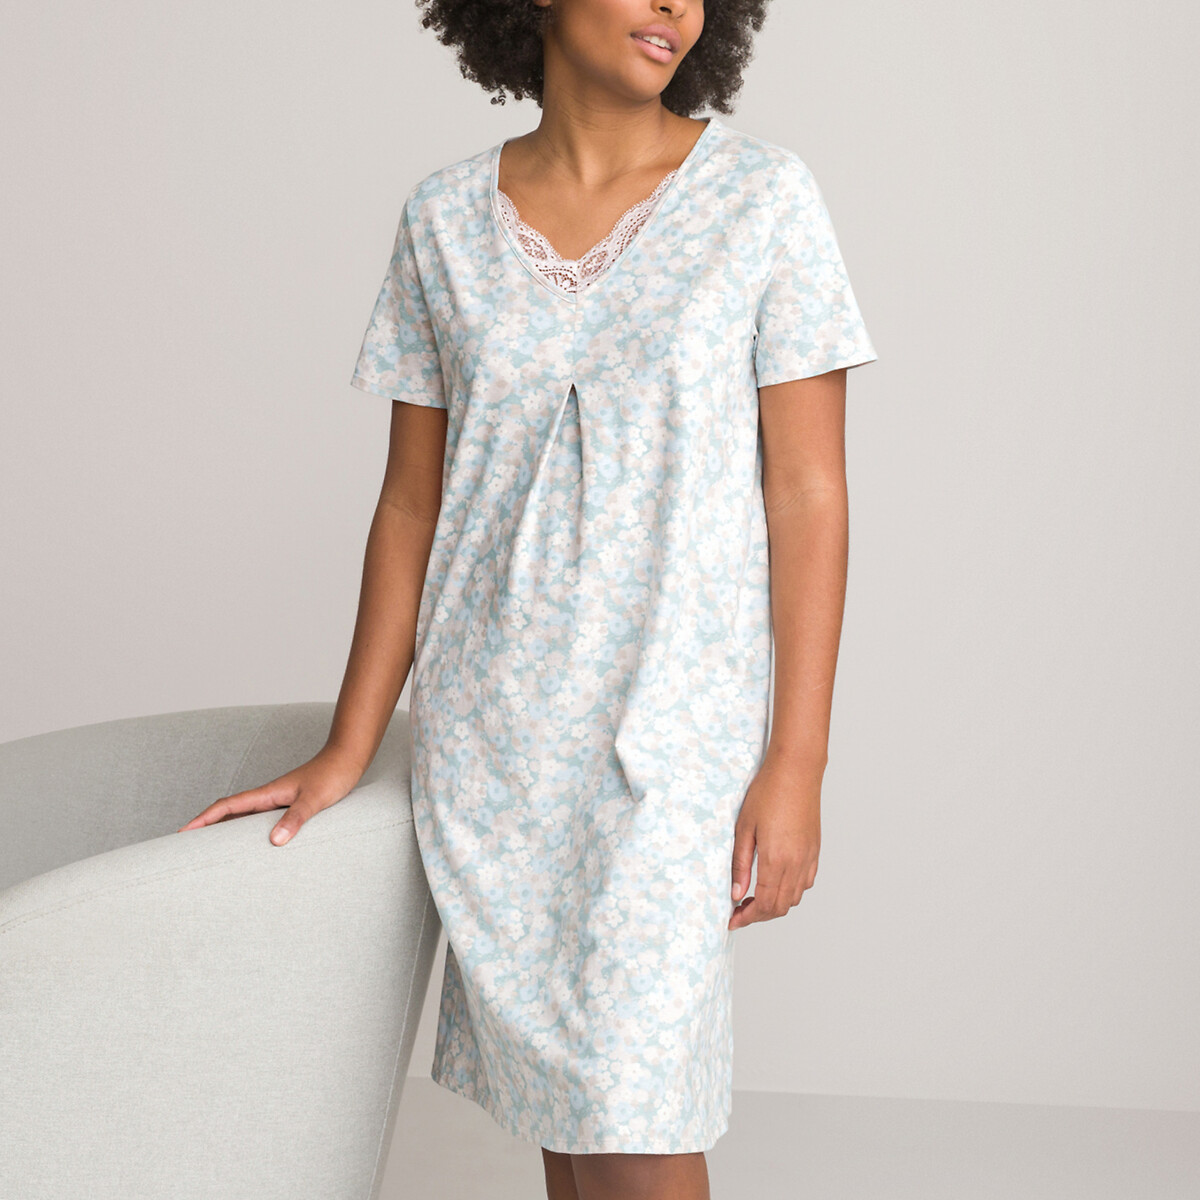 Image of Floral Print Cotton Nightdress with Lace Detail